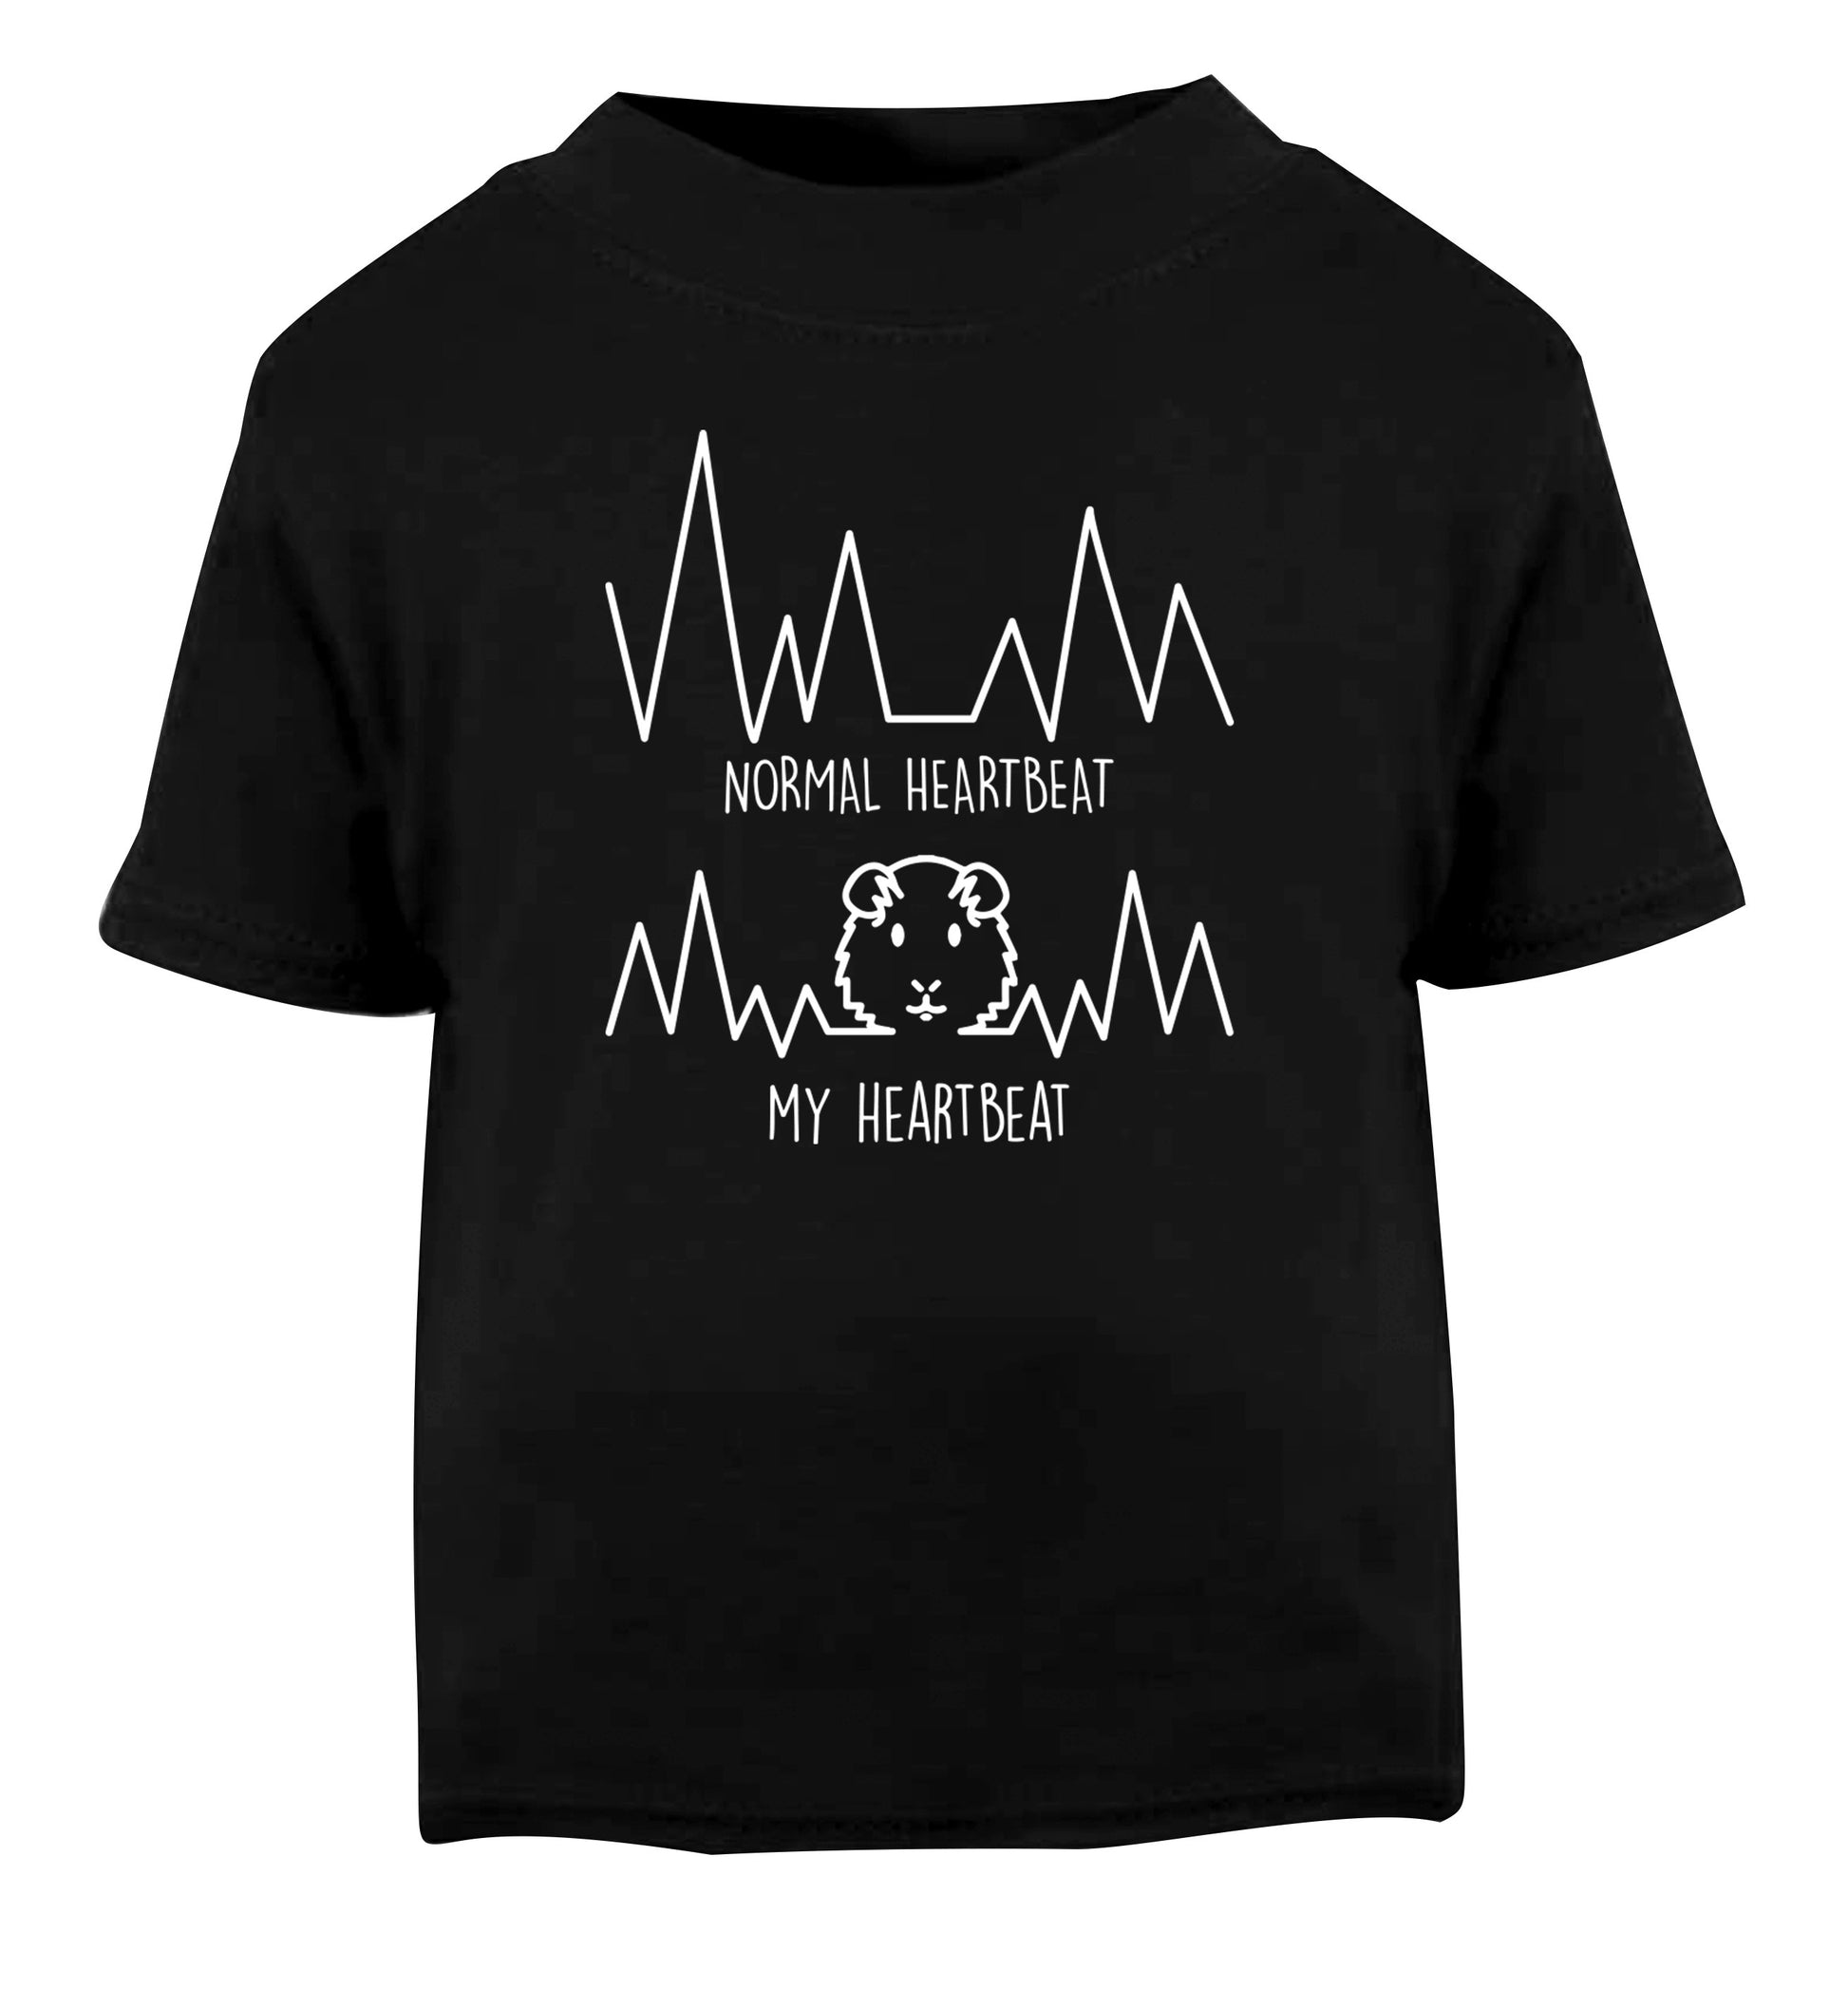 Normal heartbeat vs my heartbeat guinea pig lover Black Baby Toddler Tshirt 2 years